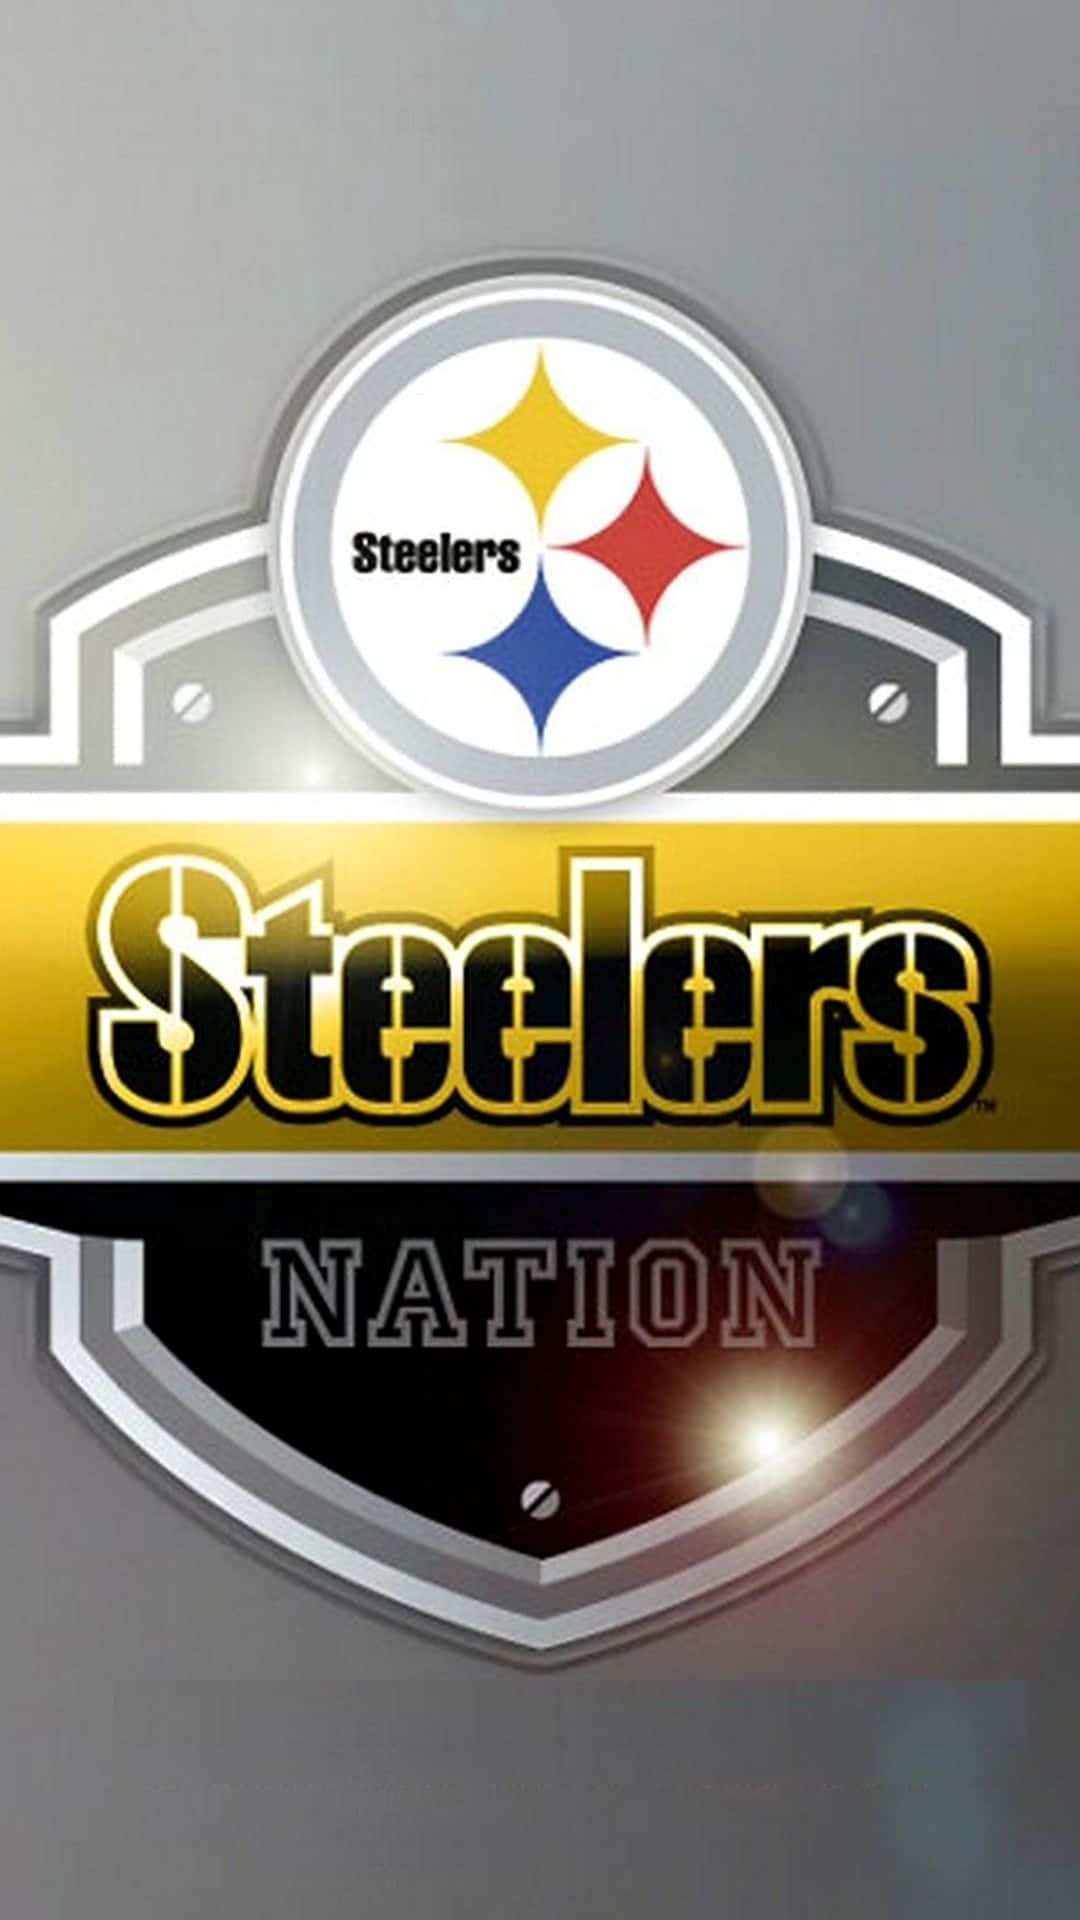 Download Steelers Background | Wallpapers.com